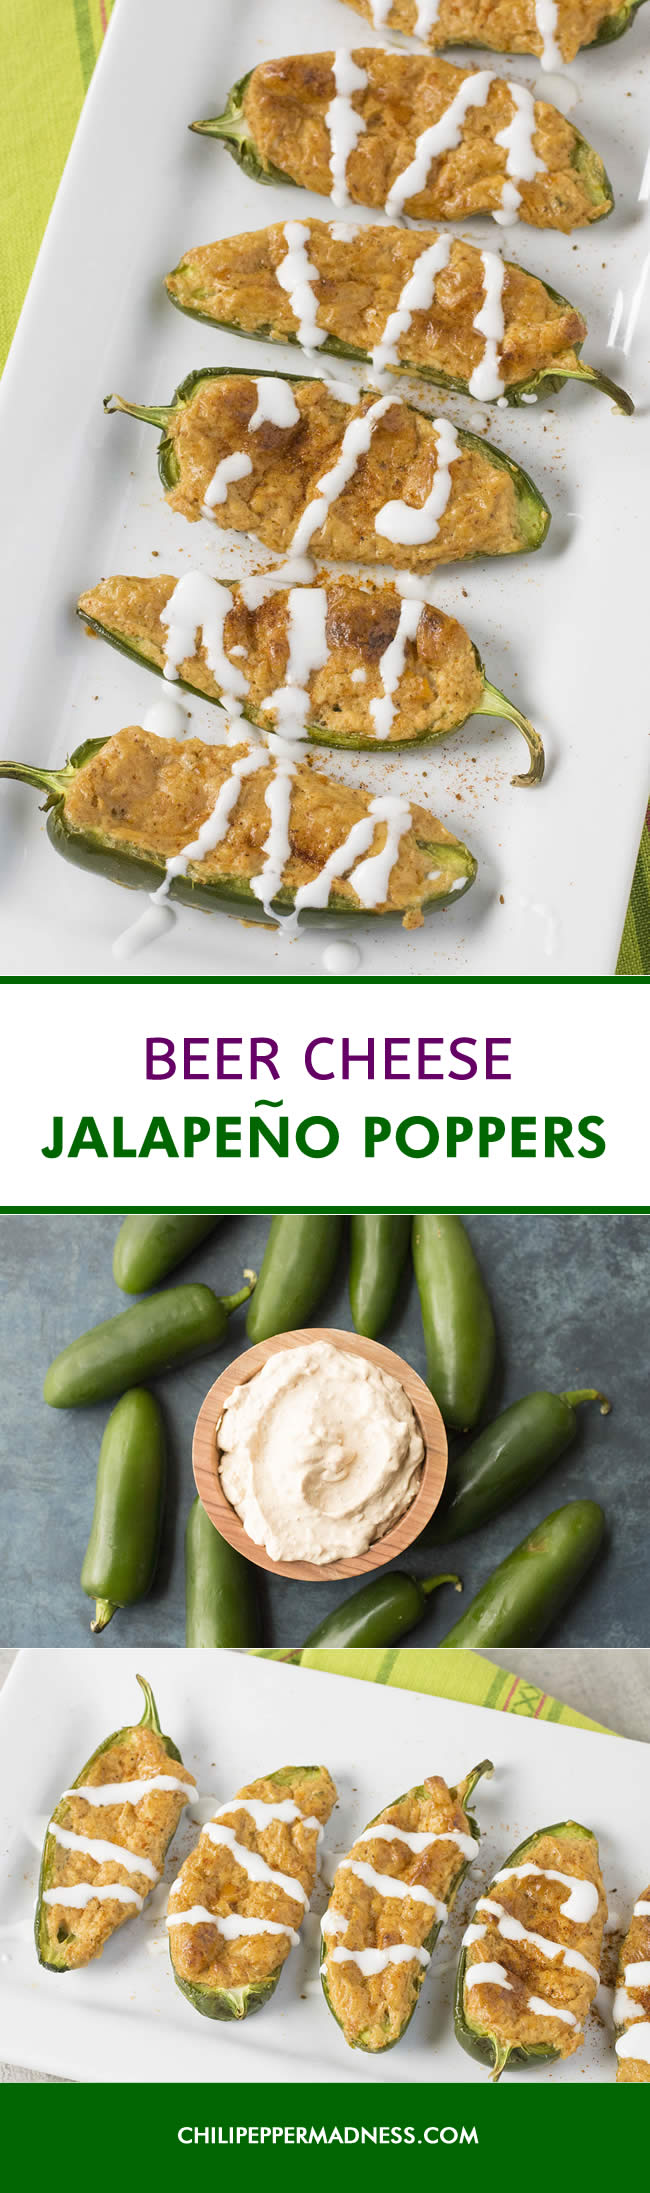 Beer Cheese Jalapeno Poppers - Recipe